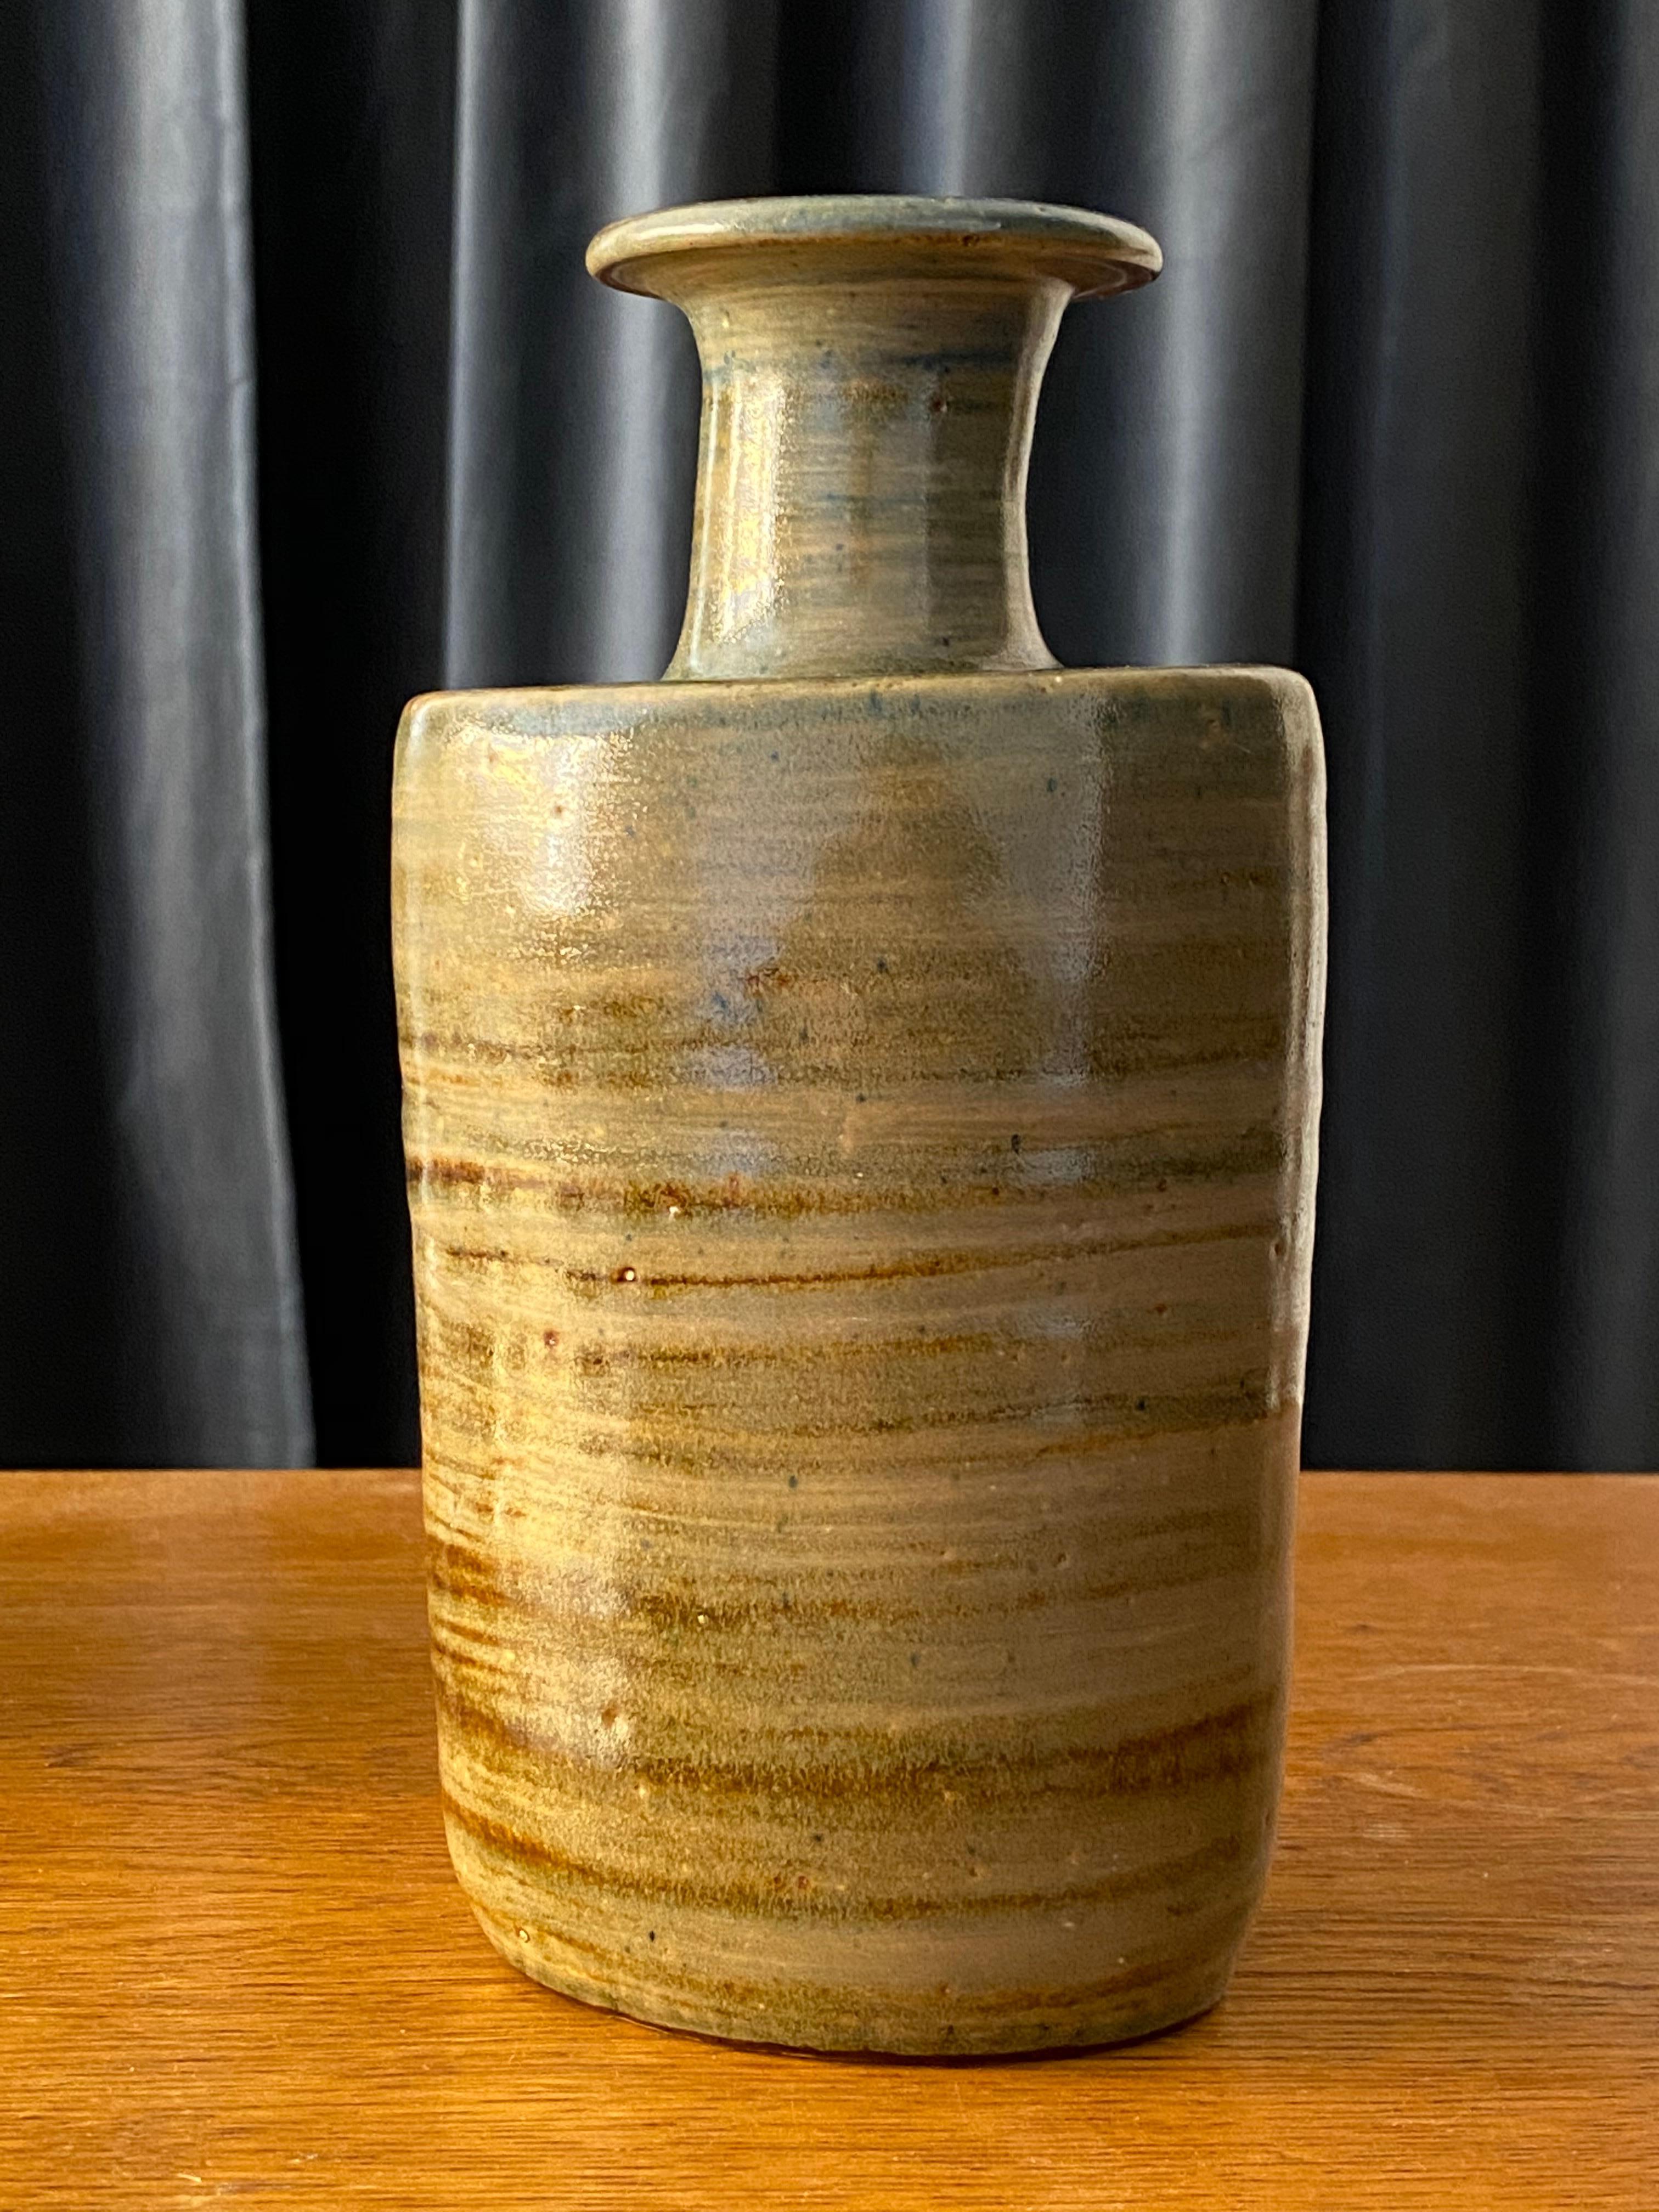 A studio vase by Swedish ceramicist Ovar Nilsson, who left large scale ceramic producer Höganäs in 1940 to pursue his own artistic practice. His work was subject to an exhibition at Höganäs Museum, Sweden in 2004. In grey / brown glaze with hints of